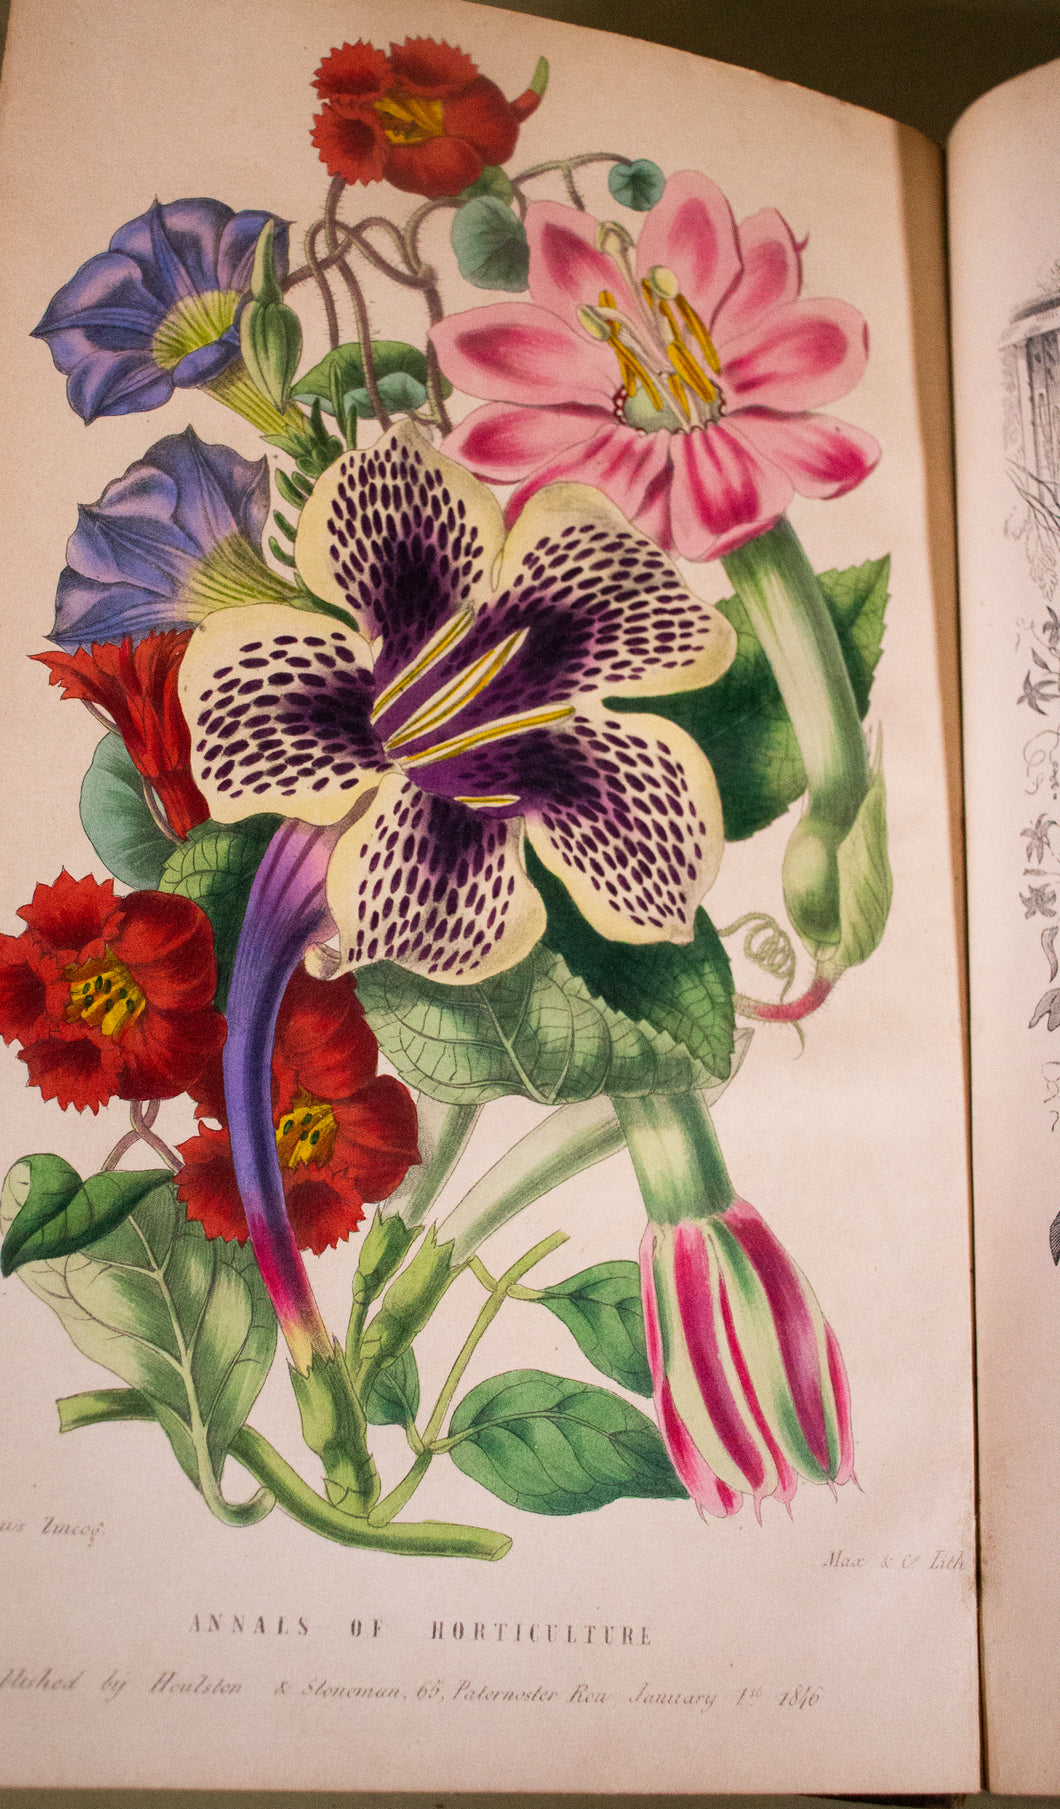 1846 The Annals of Horticulture